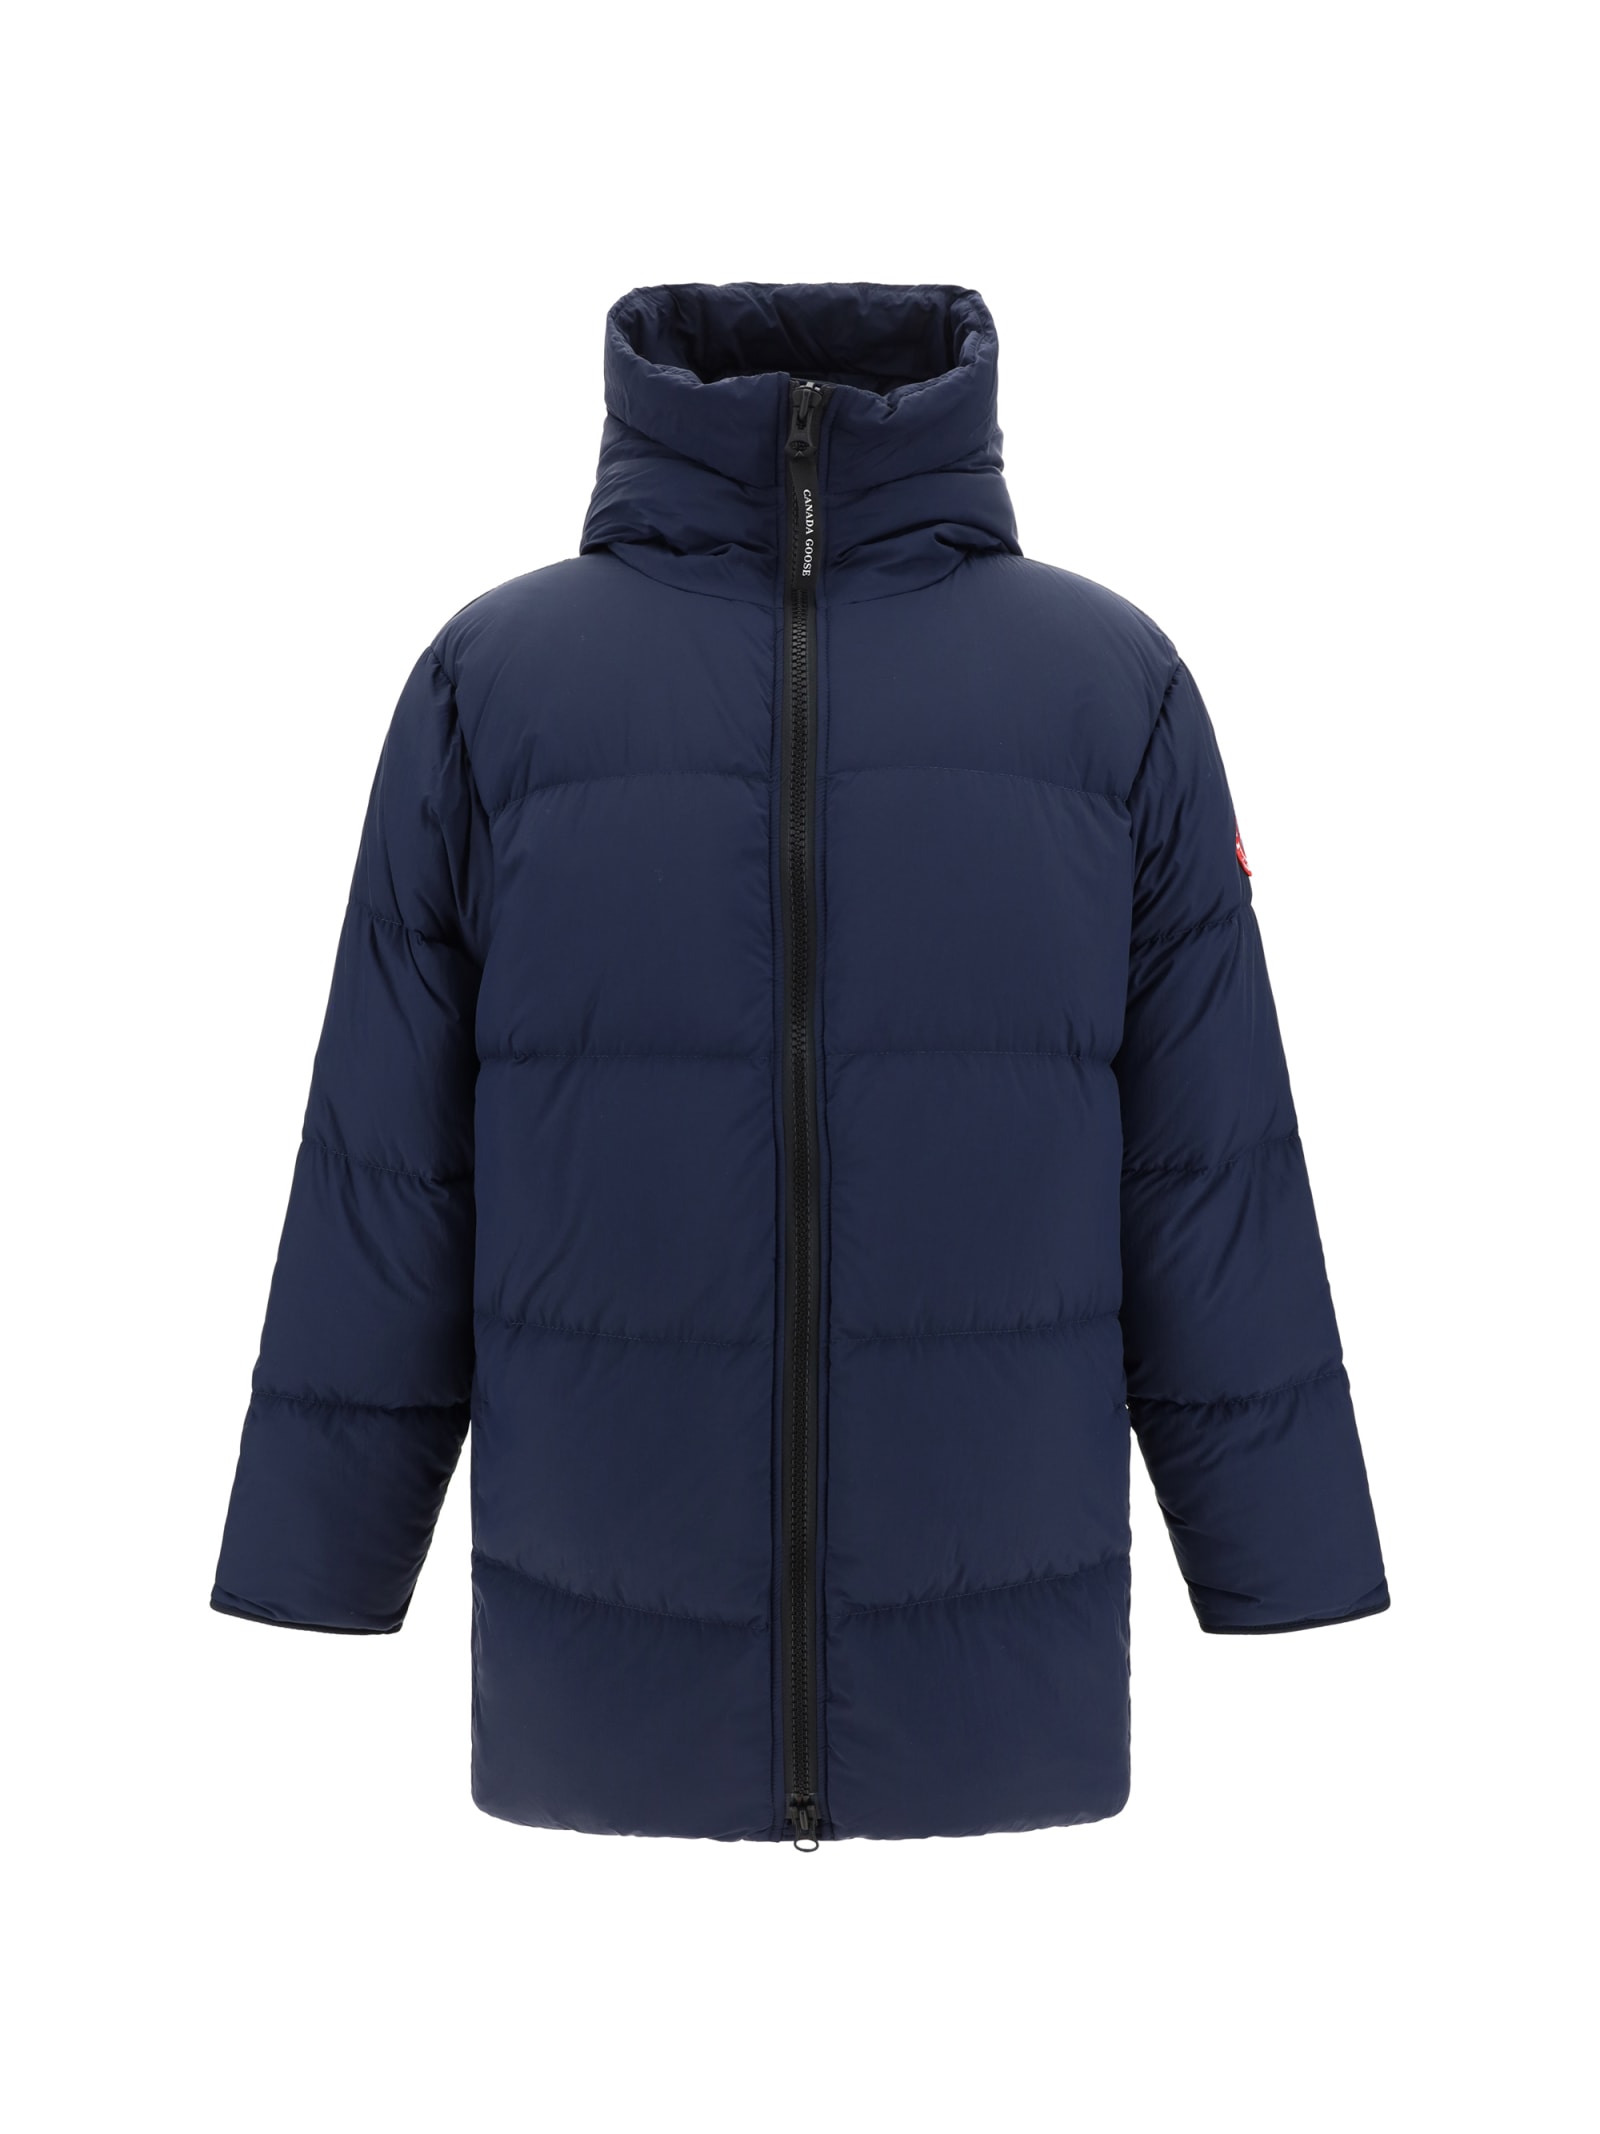 CANADA GOOSE LAWRENCE DOWN JACKET